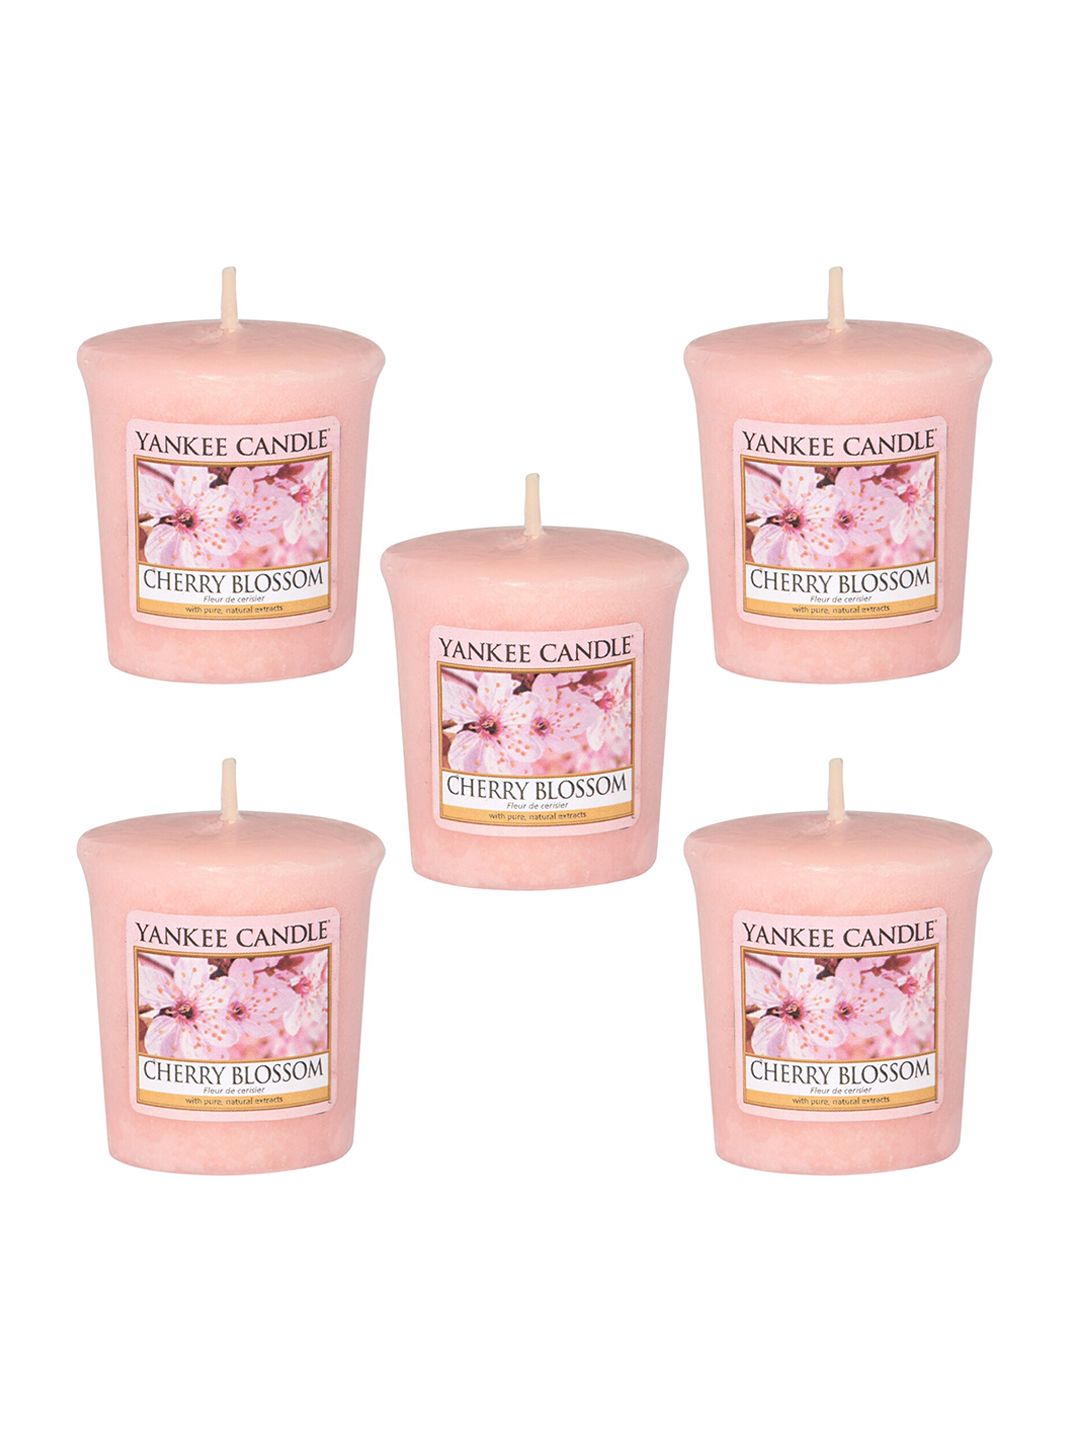 YANKEE CANDLE Set Of 5 Pink Cherry Blossom Scented Candles Price in India